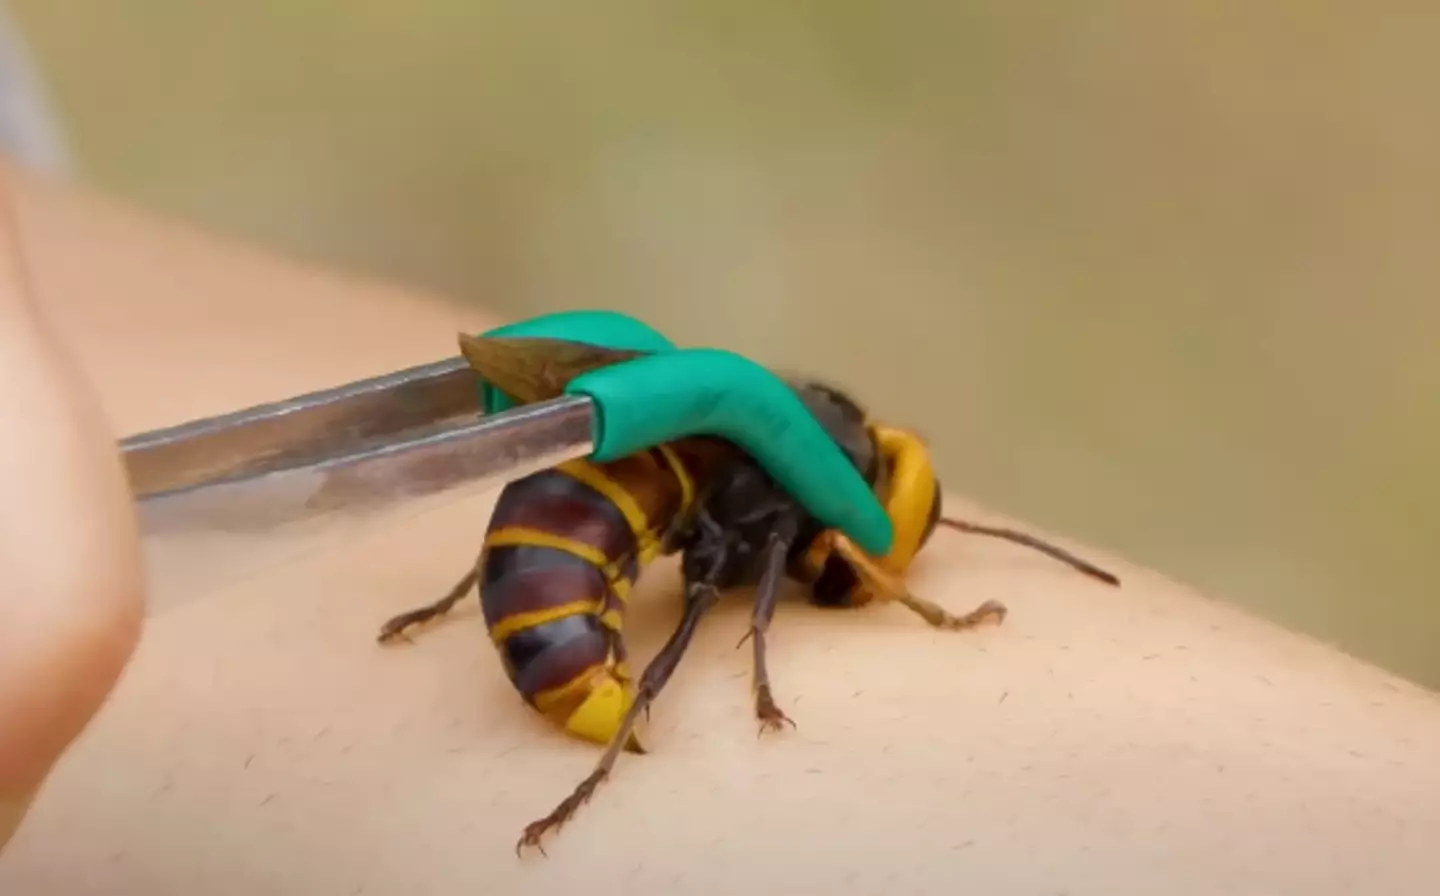 The British public have been warned of a potential surge in Asian hornets. (YouTube/Brave Wilderness/Inside Edition)